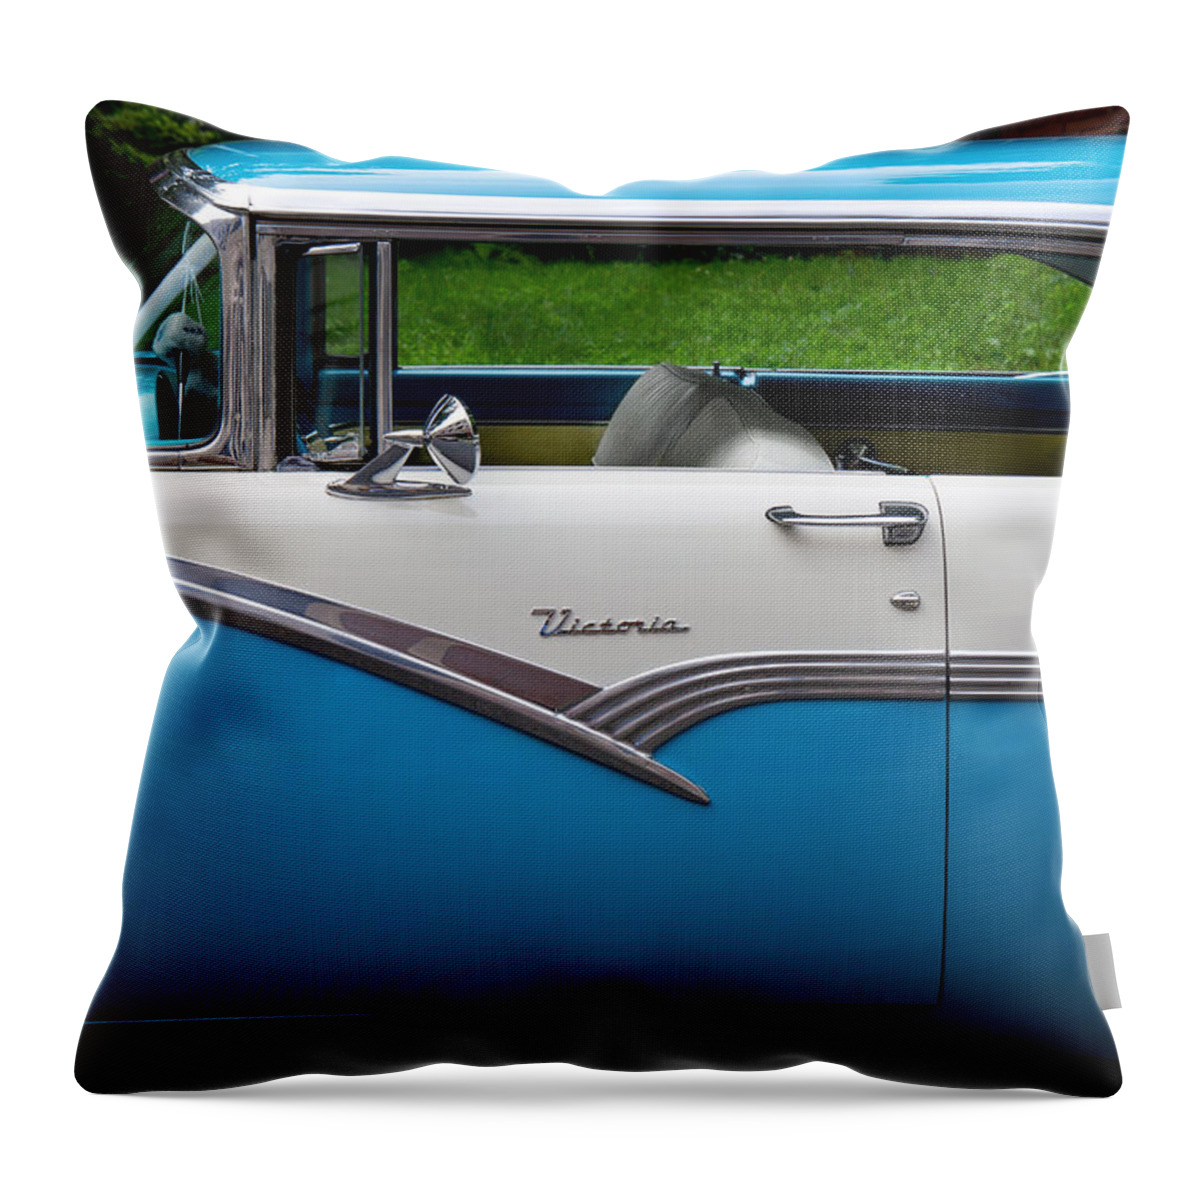 Hdr Throw Pillow featuring the photograph Car - Victoria 56 by Mike Savad